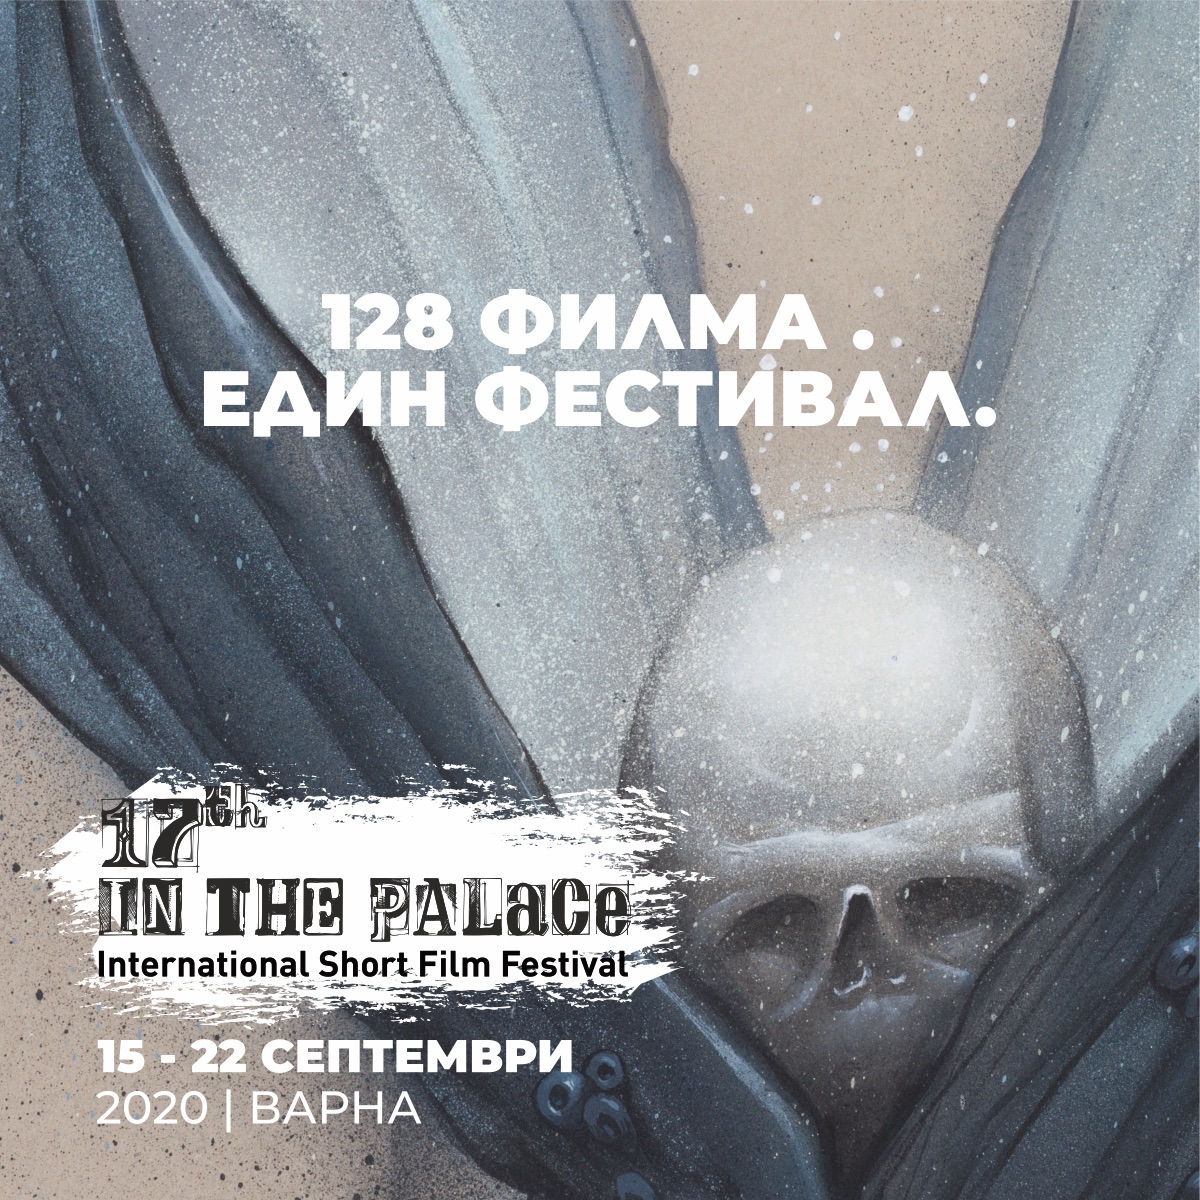 9    IN THE PALACE INTERNATIONAL SHORT FILM FESTIVAL